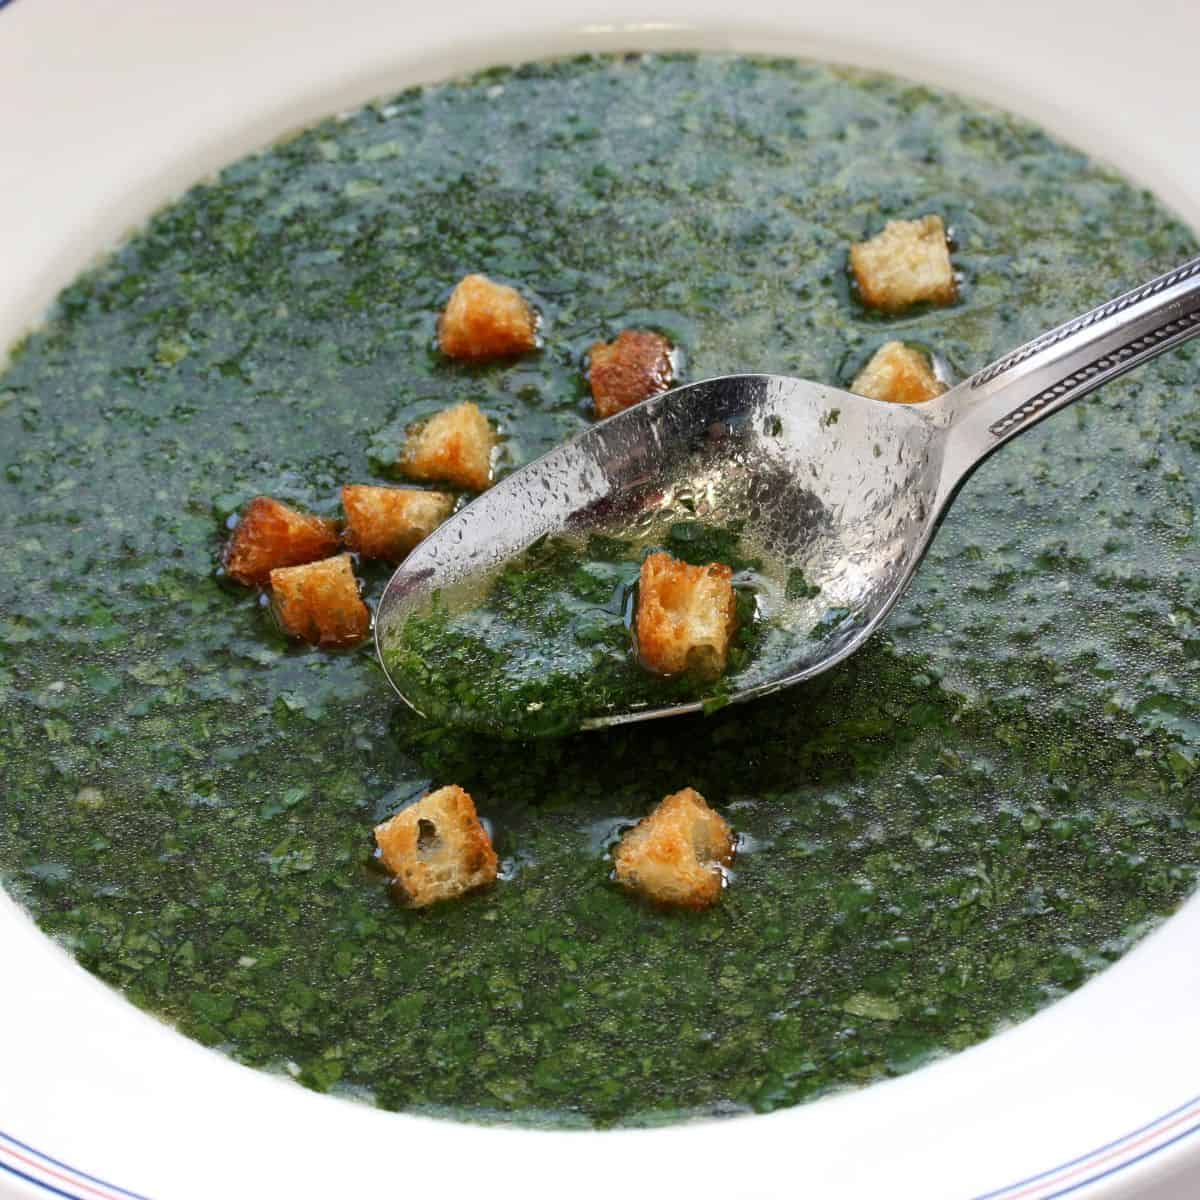 A bowl of green soup with croutons in it, a delicious cuisine found in Egypt.